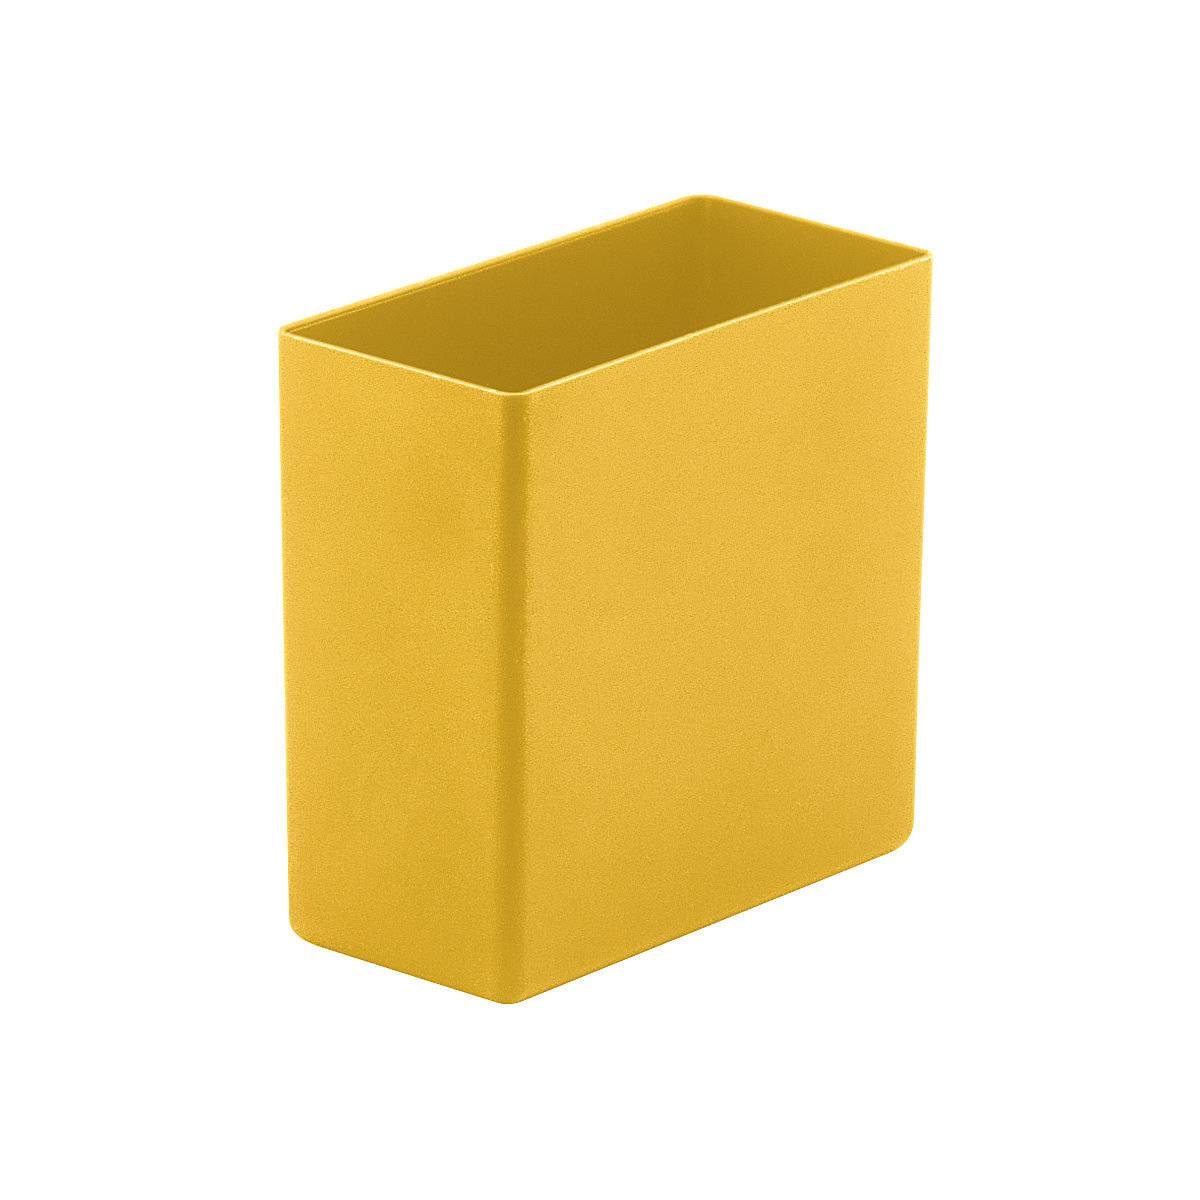 Bins, height 90 mm, yellow, LxW 49x99 mm, pack of 50-12